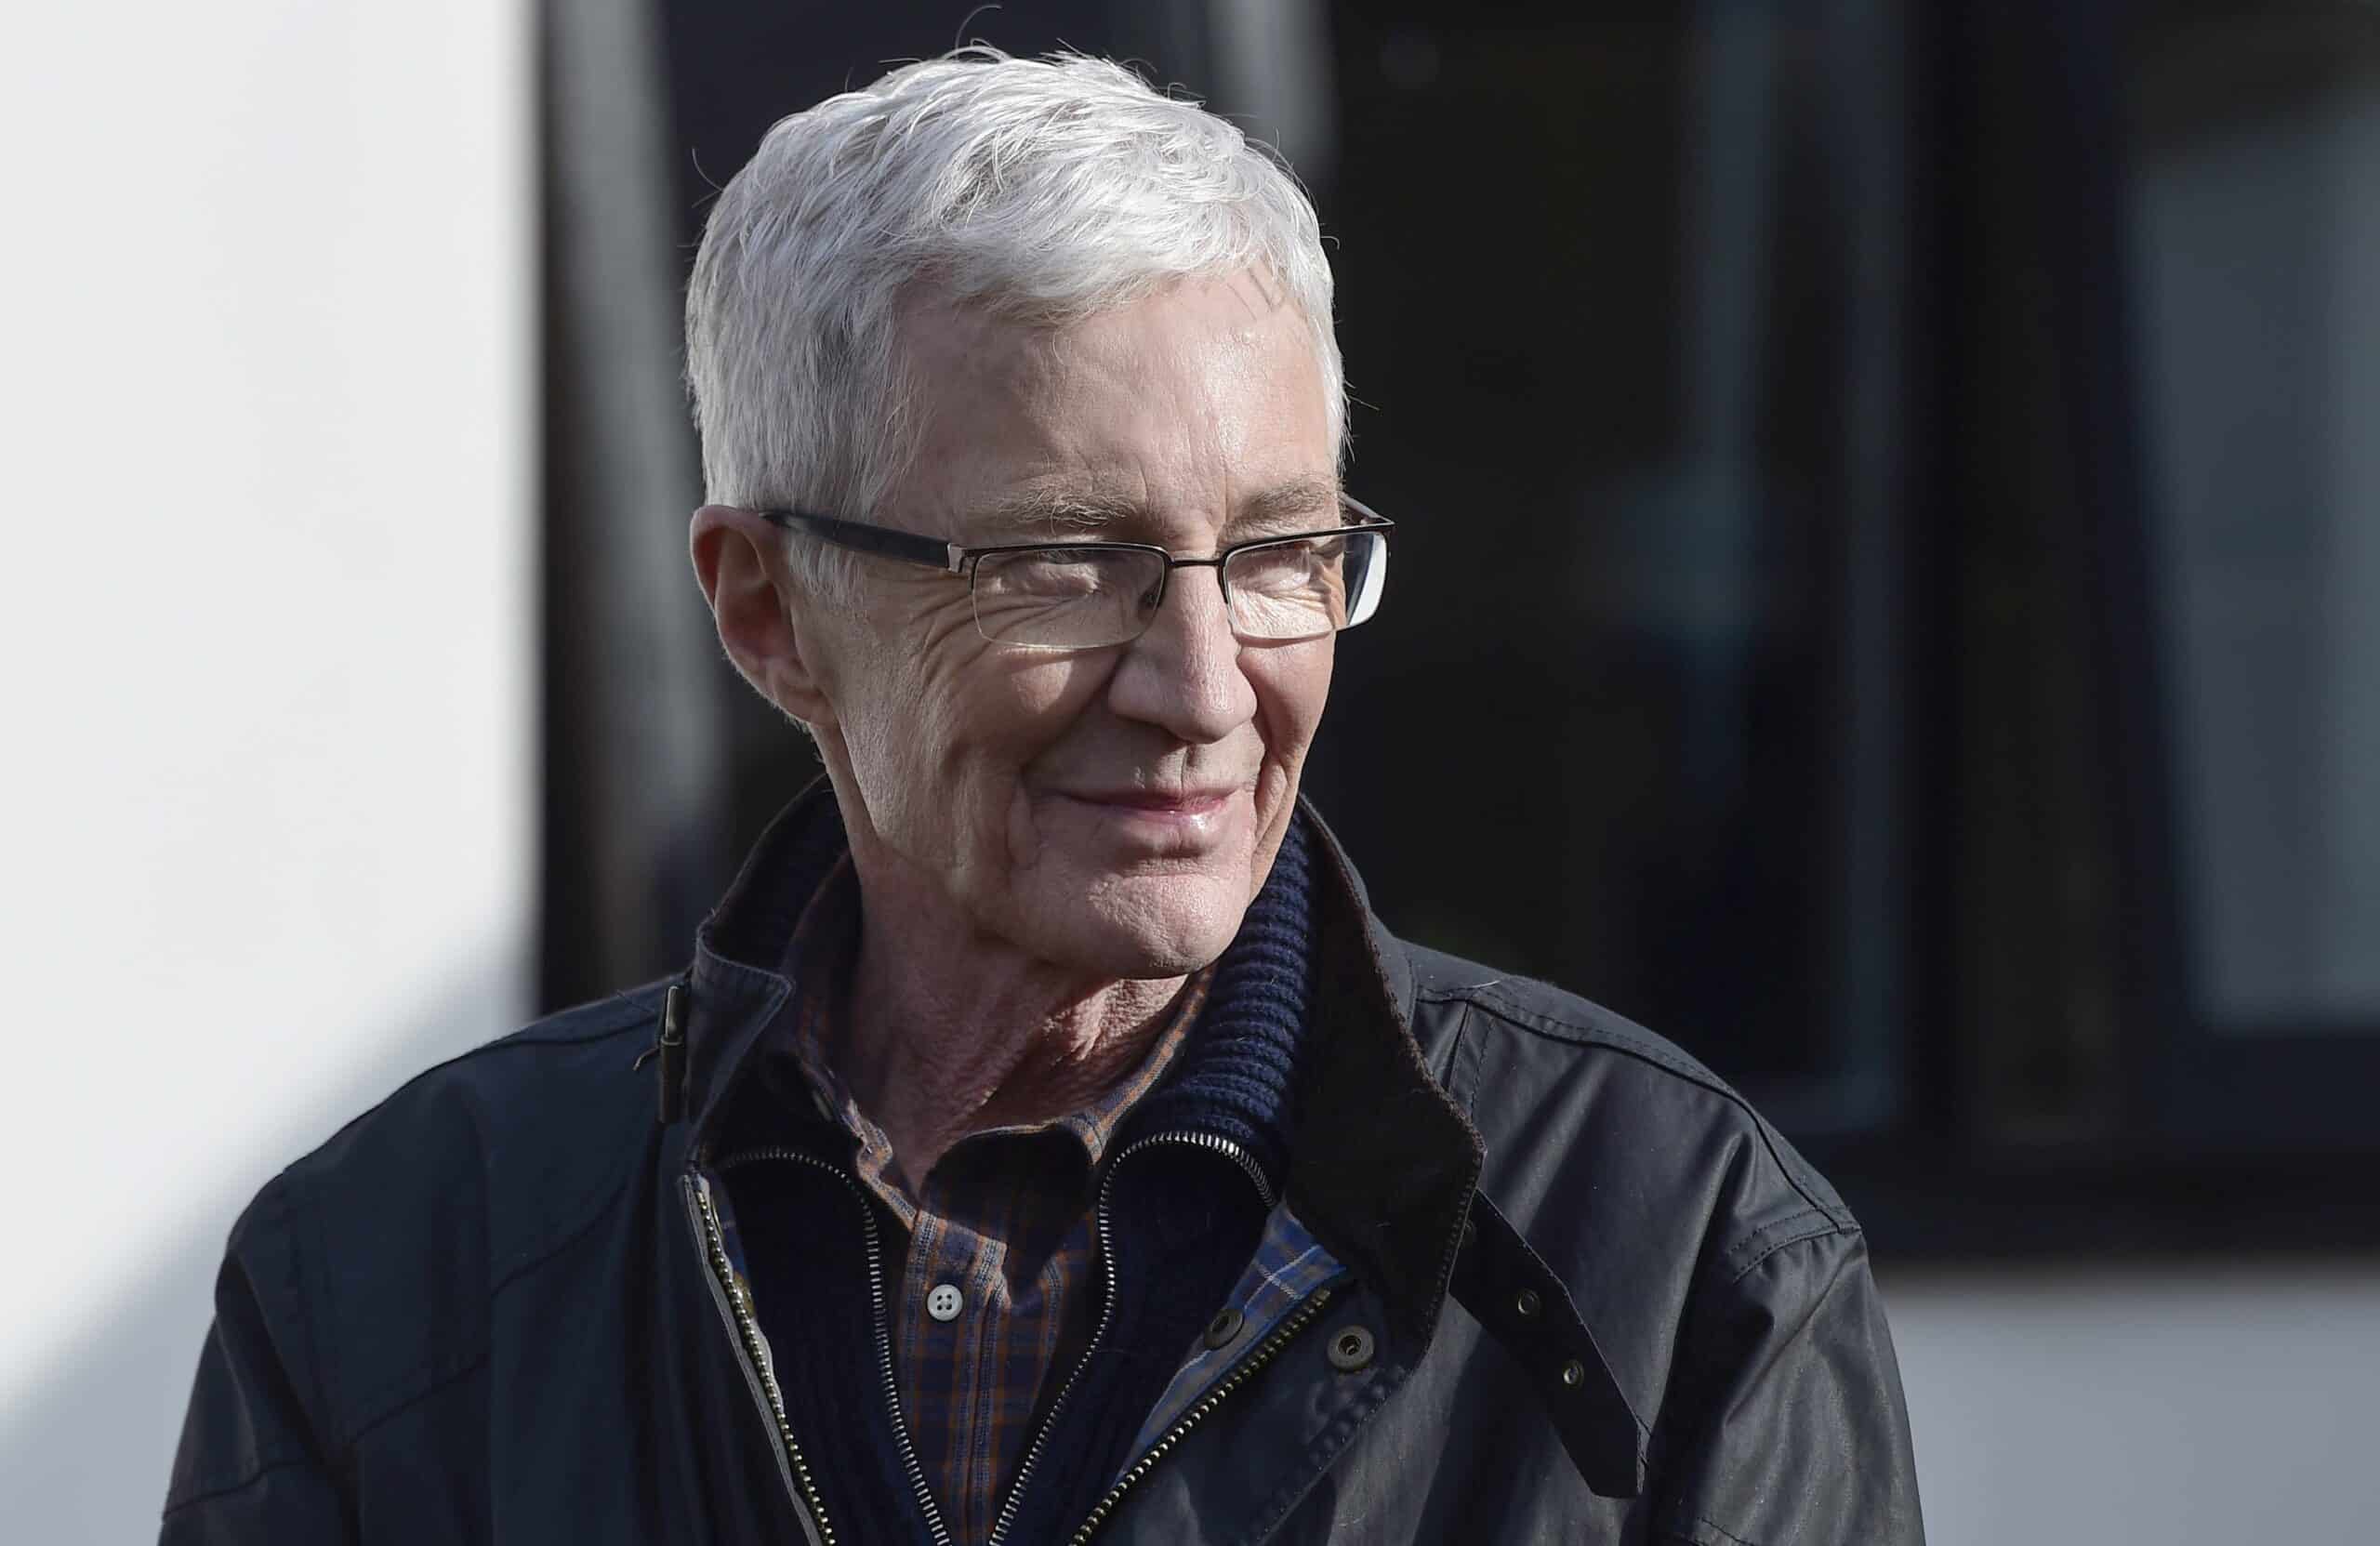 Paul O’Grady leaves £500k to Battersea Dogs Home in his will